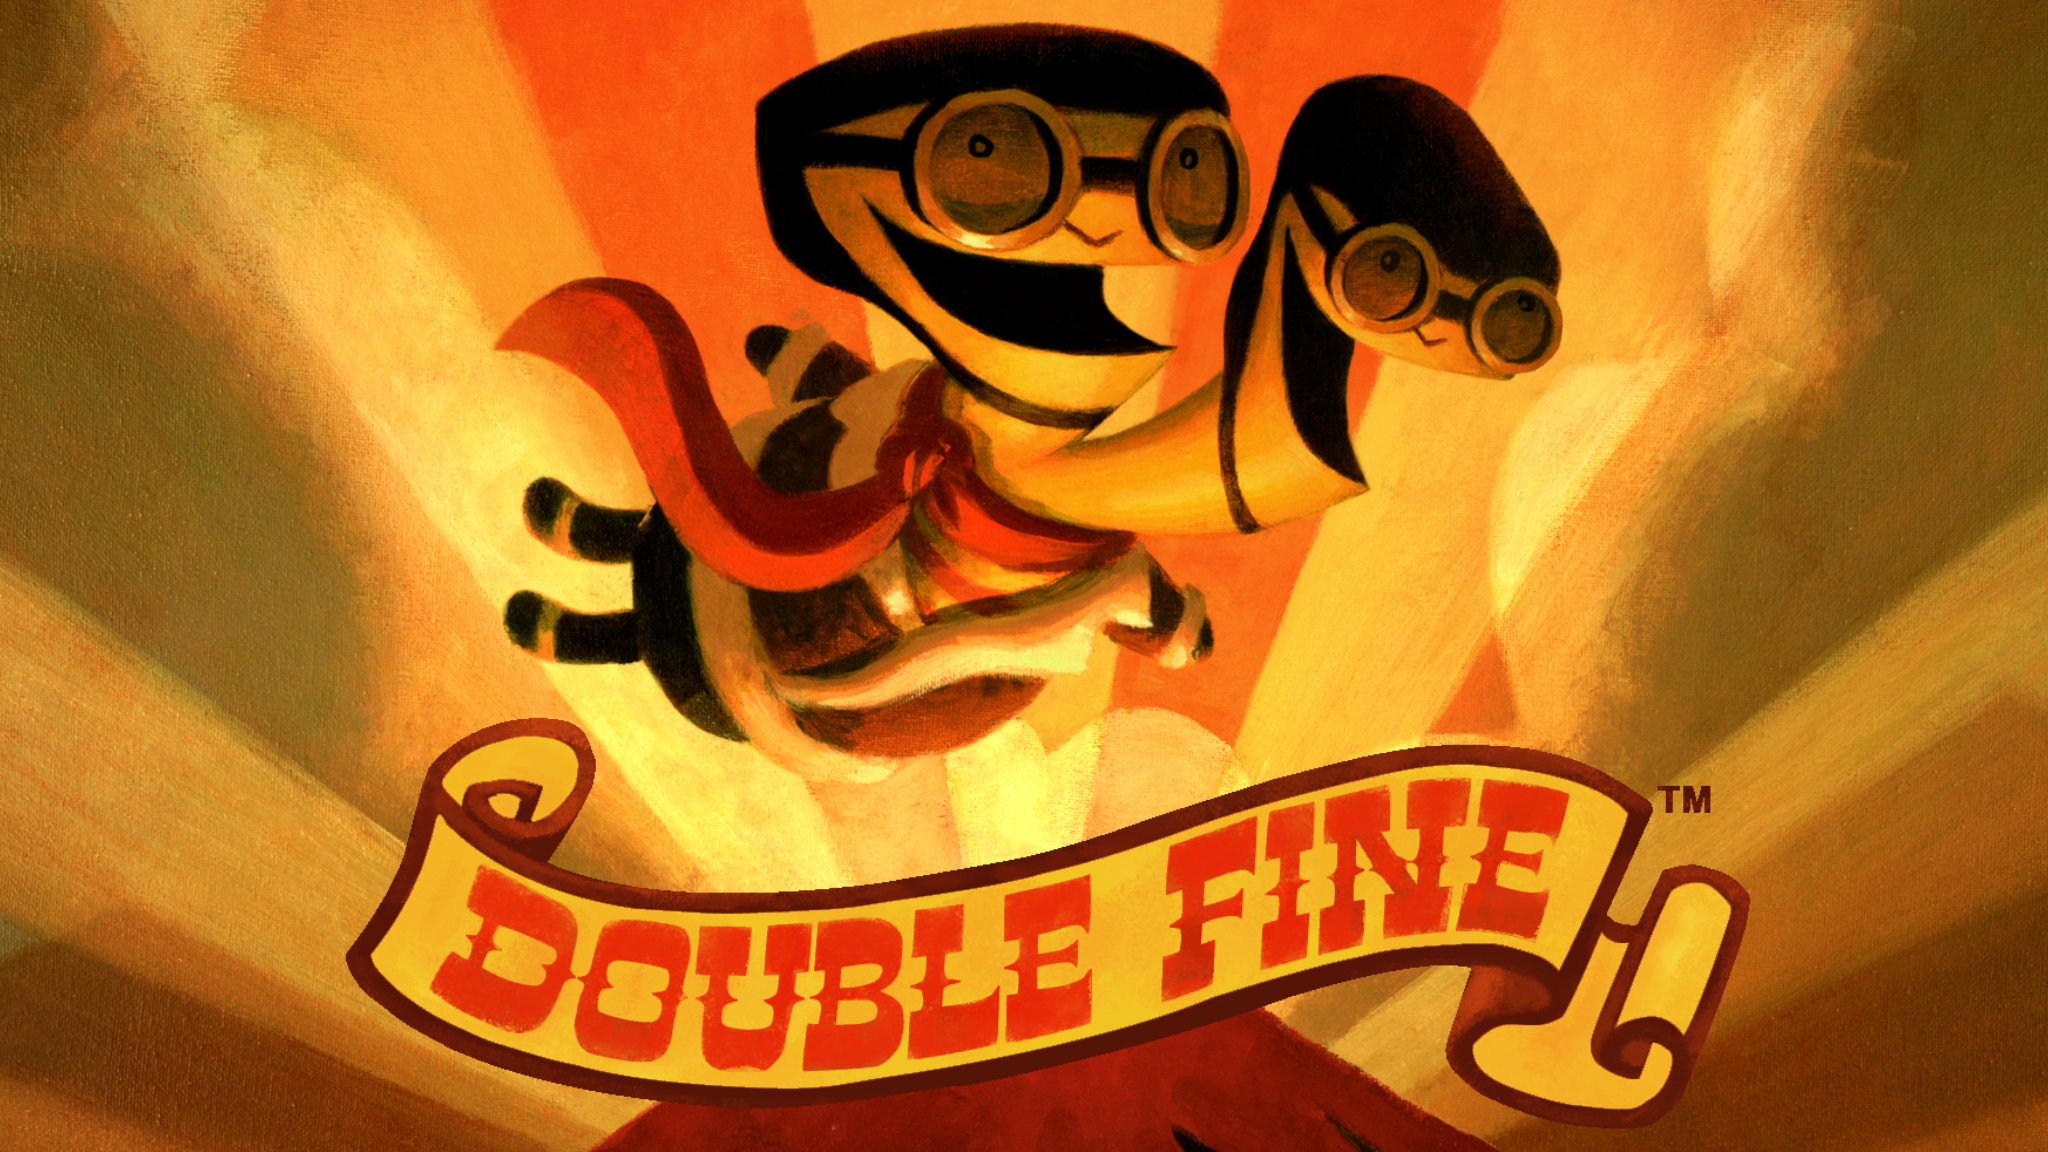 Double fine productions steam